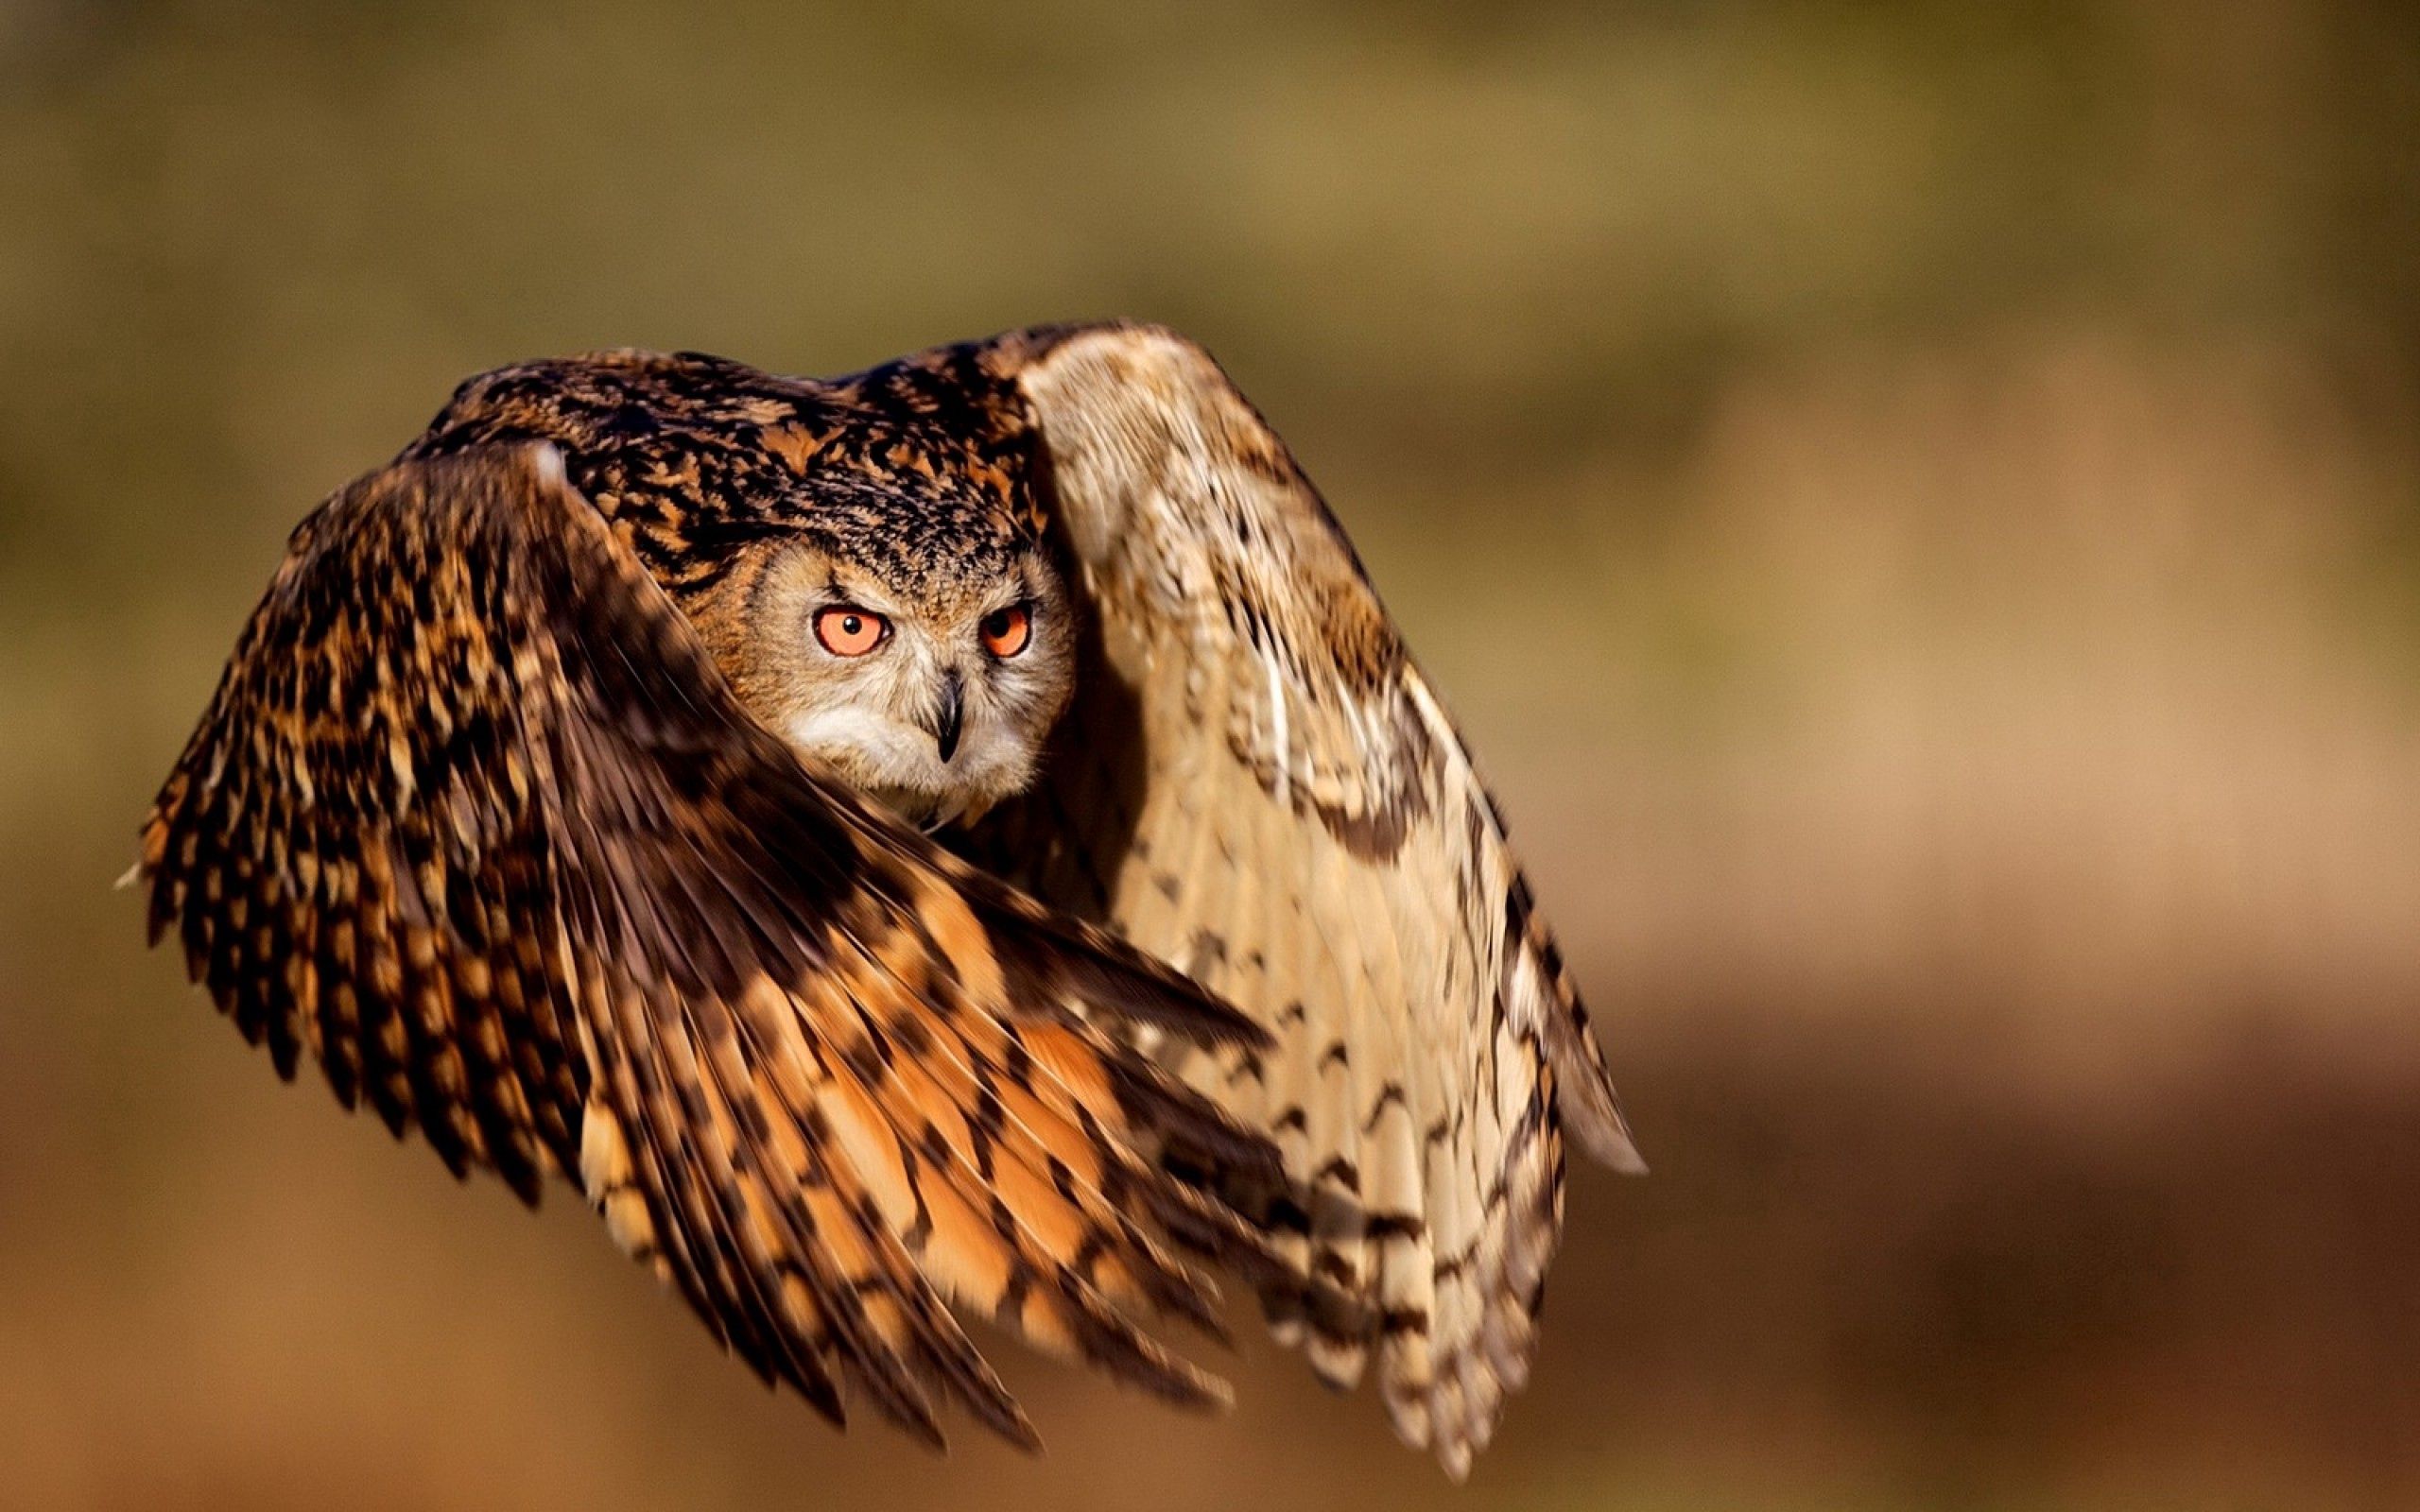 136482 download wallpaper animals, owl, bird, flight, wings screensavers and pictures for free